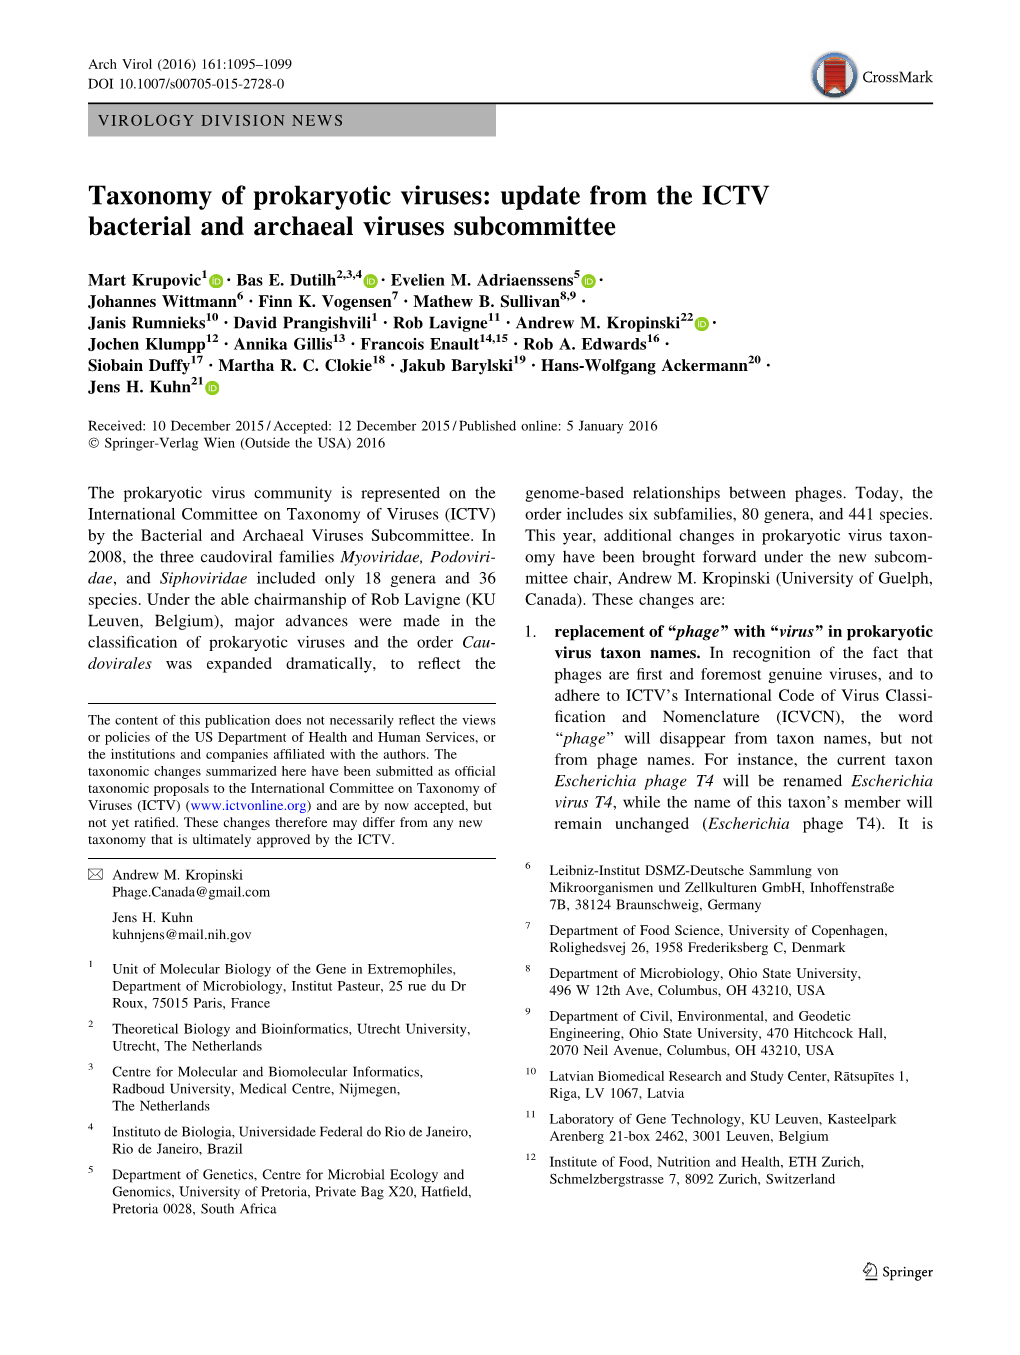 Taxonomy of Prokaryotic Viruses: Update from the ICTV Bacterial and Archaeal Viruses Subcommittee